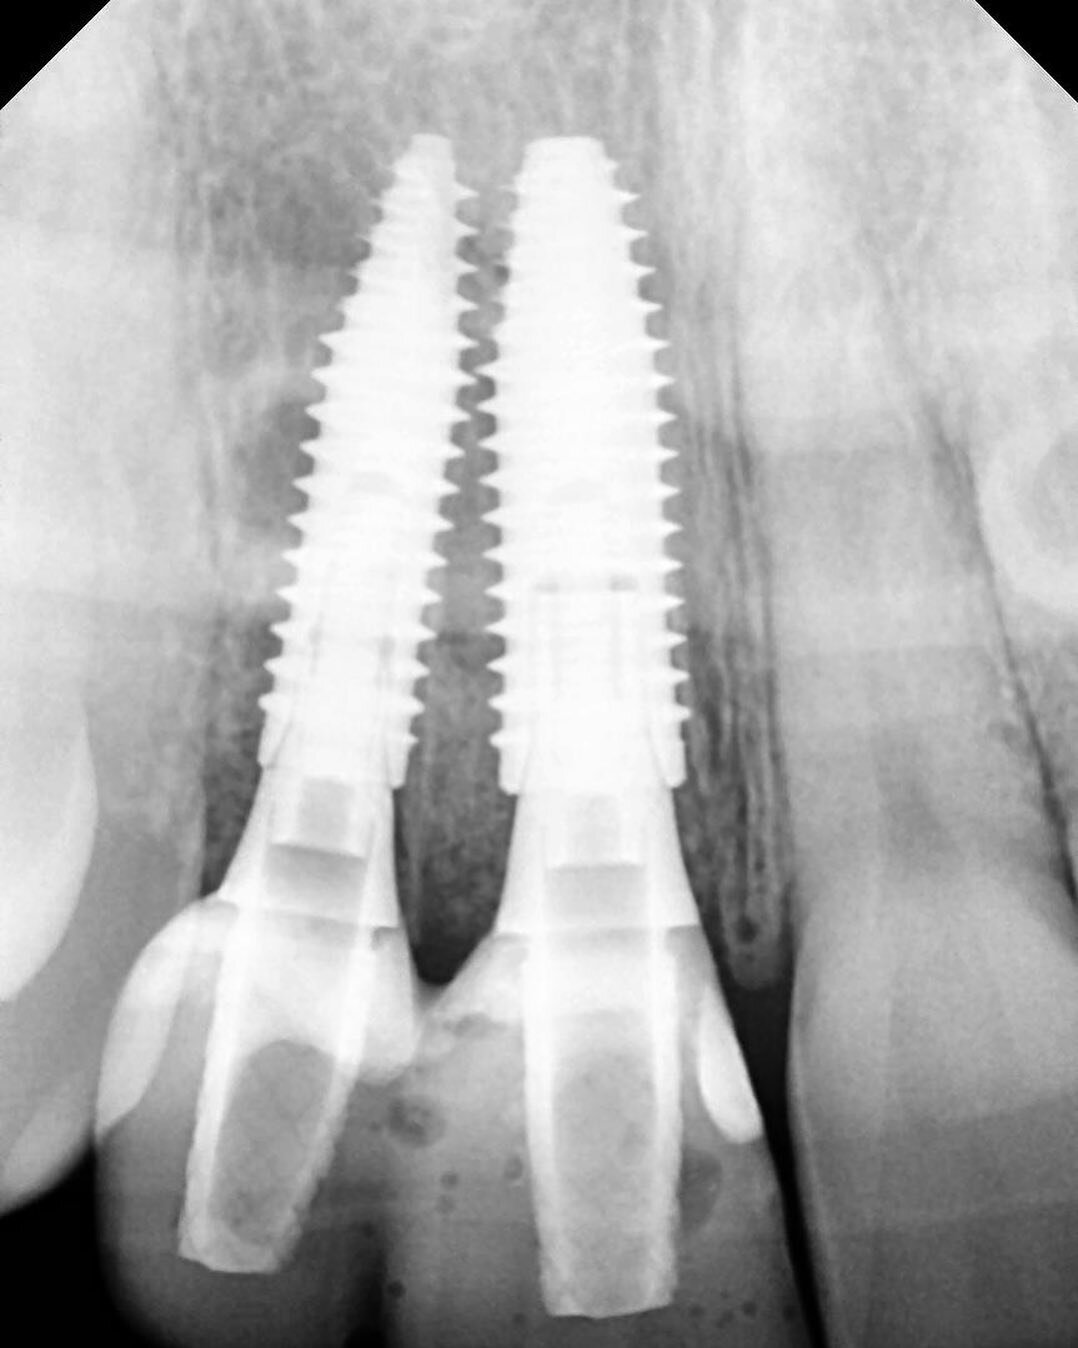 Good thing those are implants and not natural roots. 😂. 

Jokes aside, the implant positions were driven by restorative positions, shape, and angulations of the final restorations.  The emergence profile is the key factor in Implant depth, angulatio